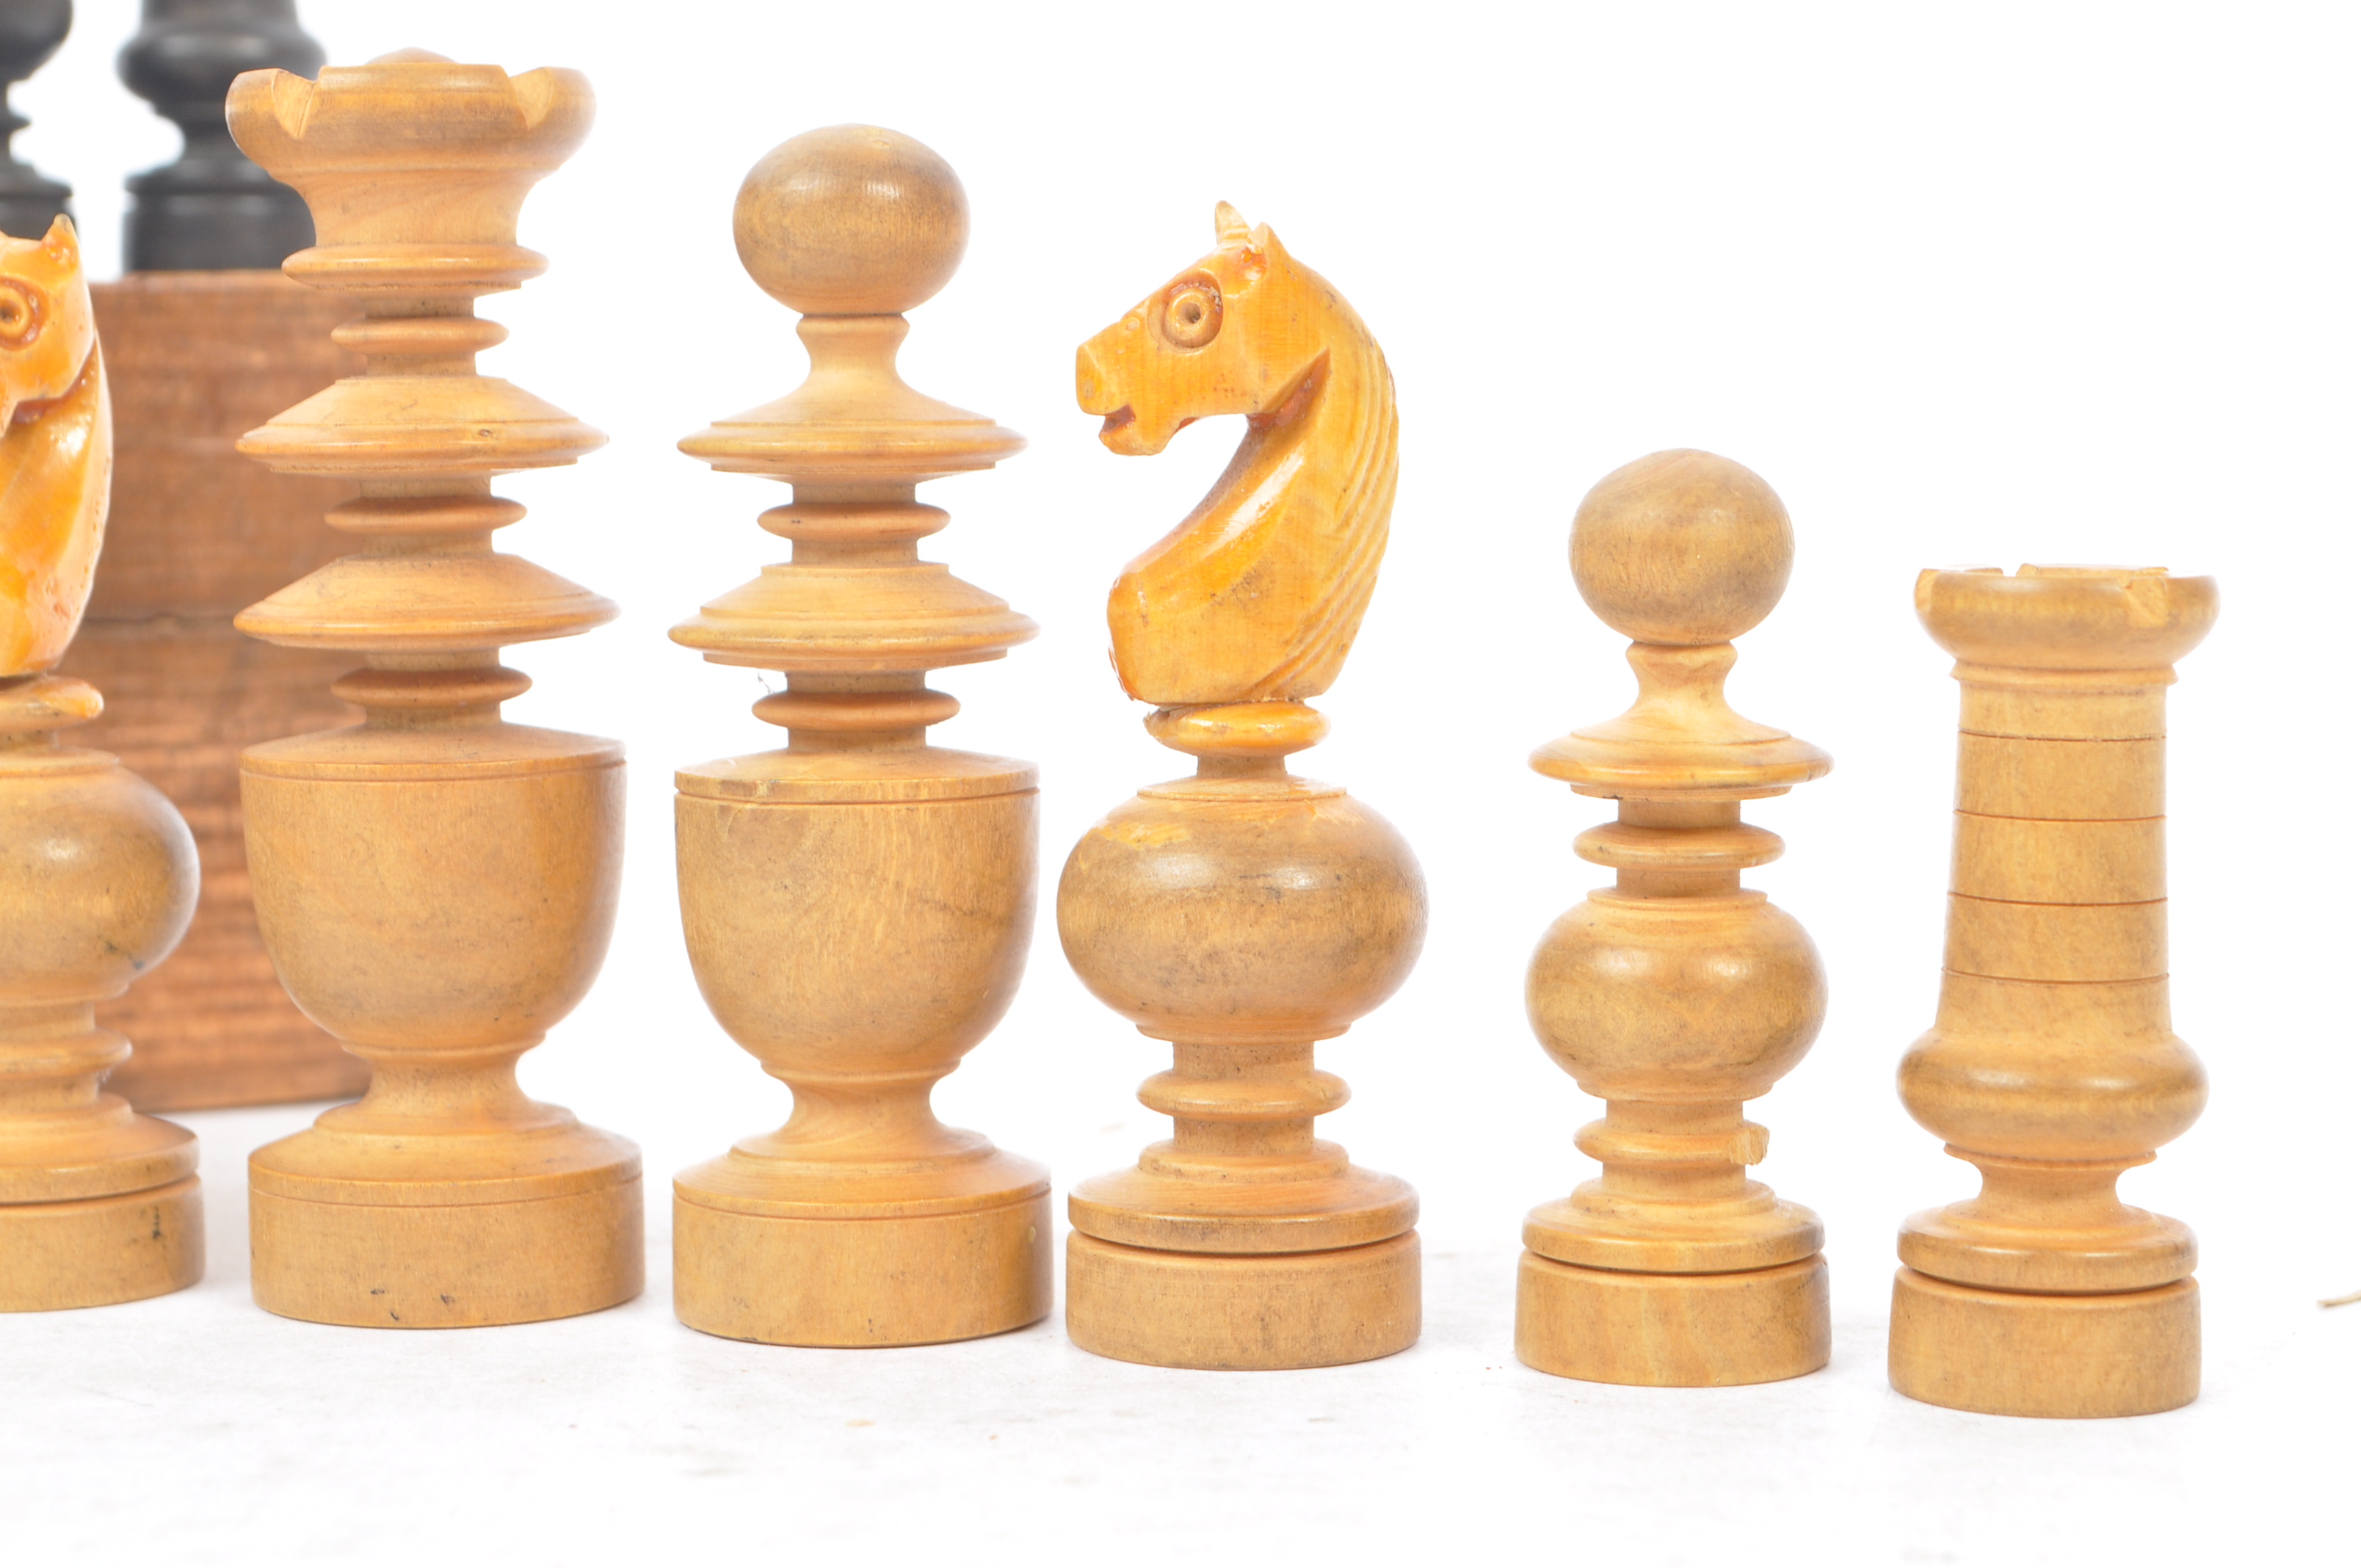 EARLY 20TH CENTURY TURNED WOODEN CHESS SET - Image 7 of 7